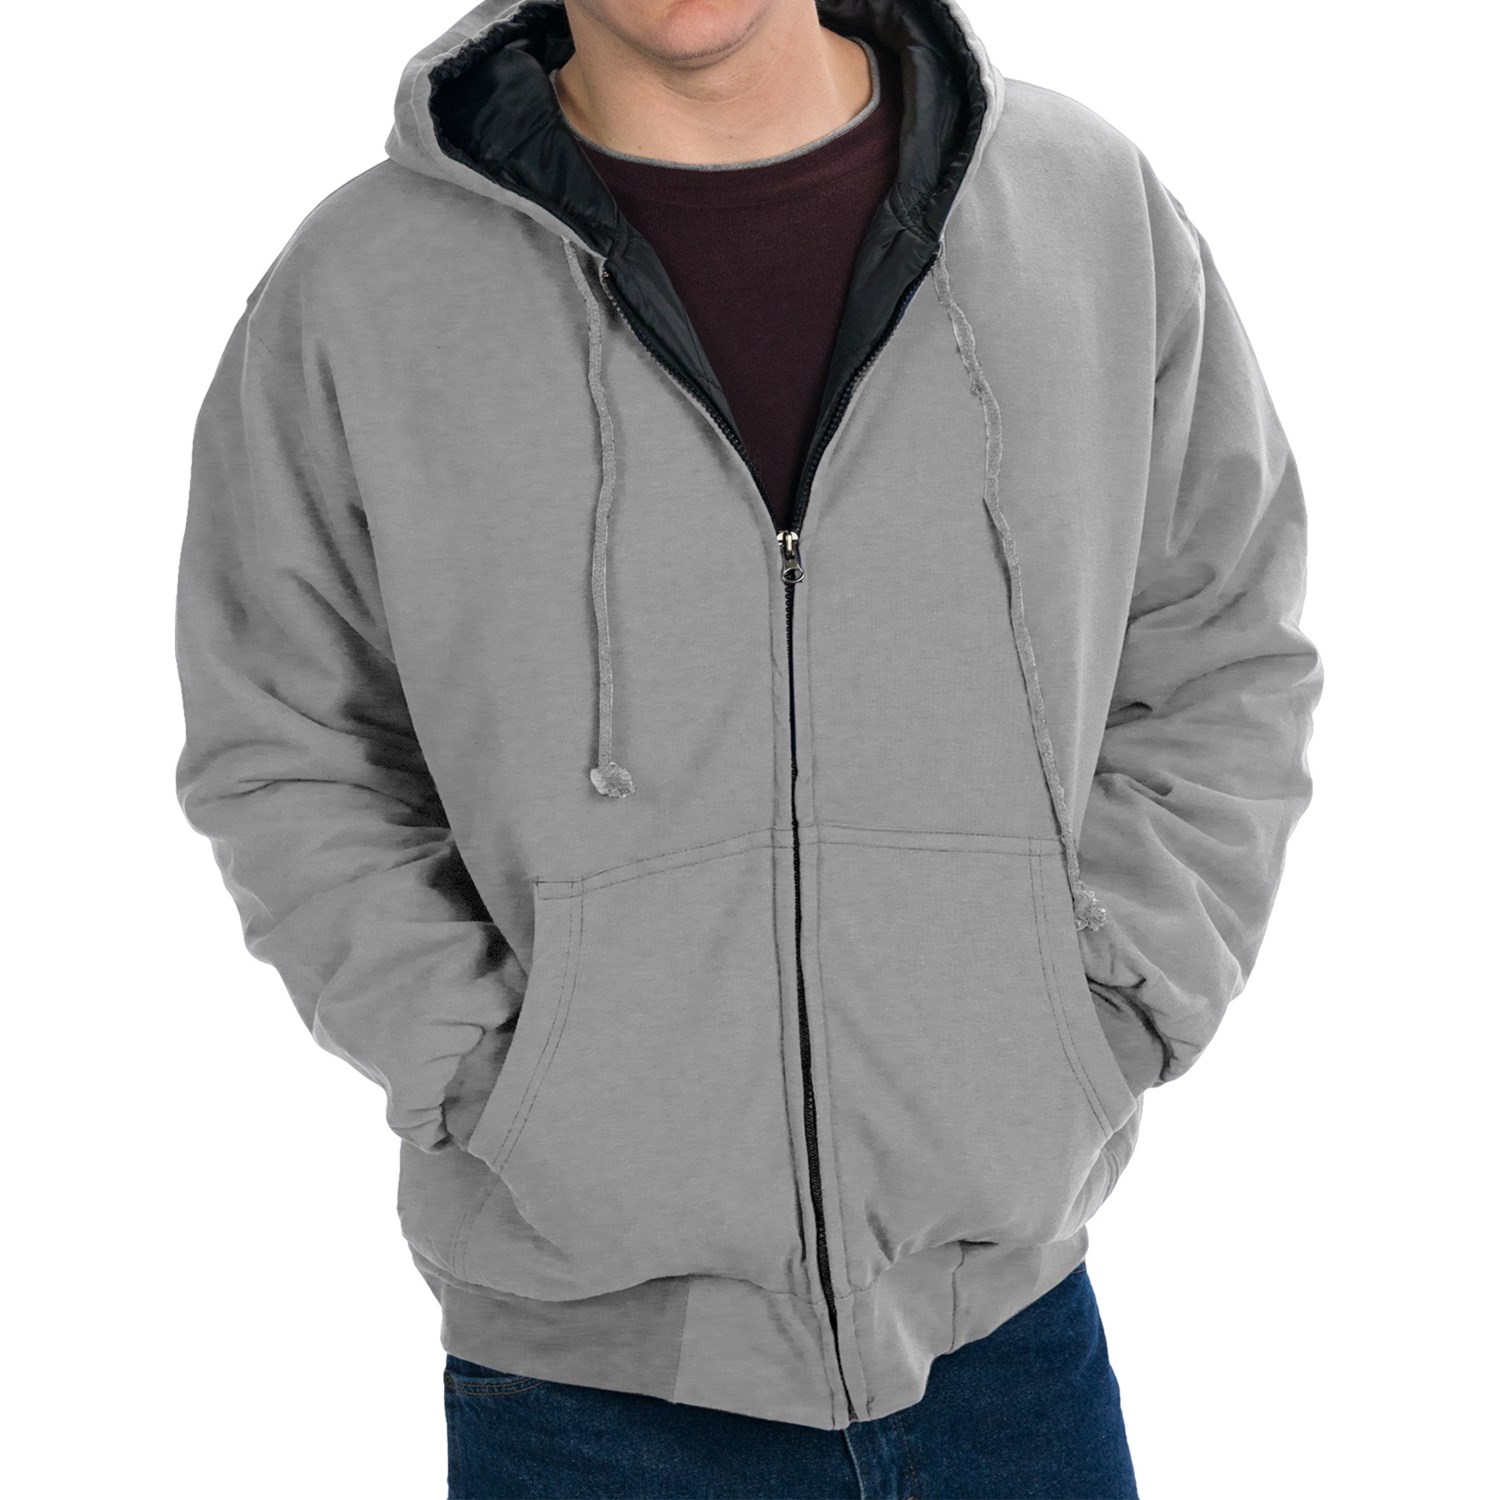 National Outfitters Quilt-Lined Hoodie (For Men) - Save 81%